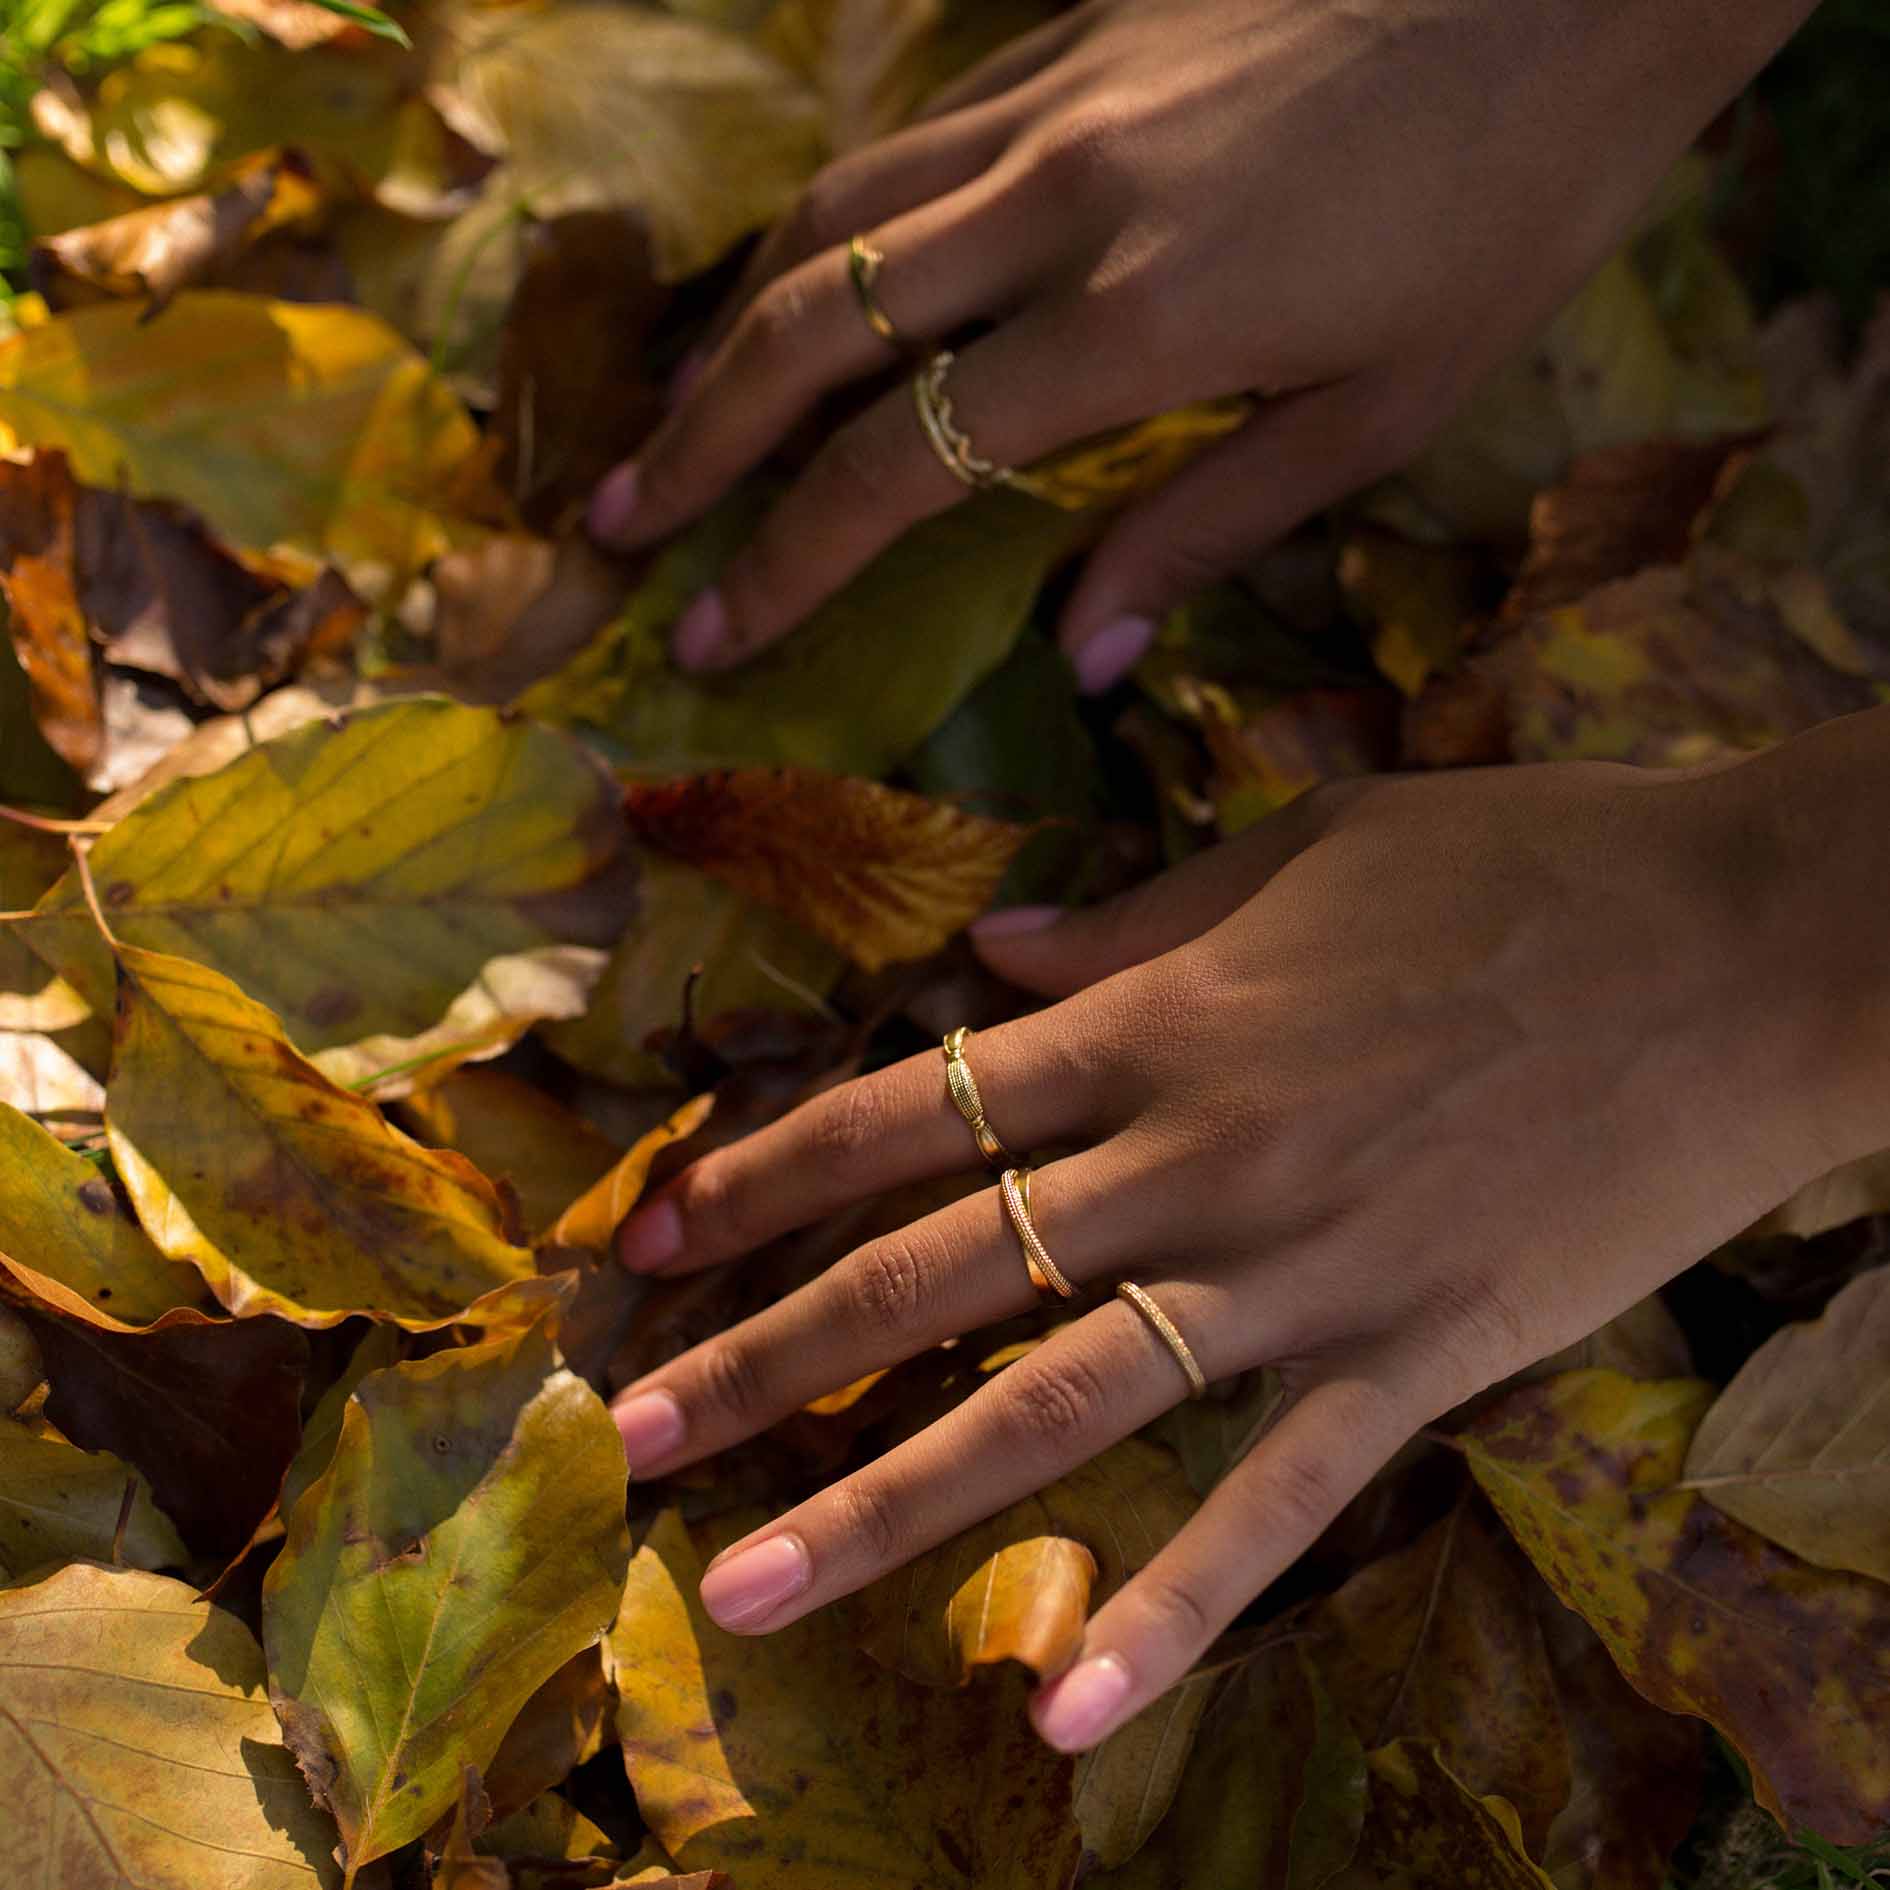 A model rummaging through the leaves wearing a gold rings. 